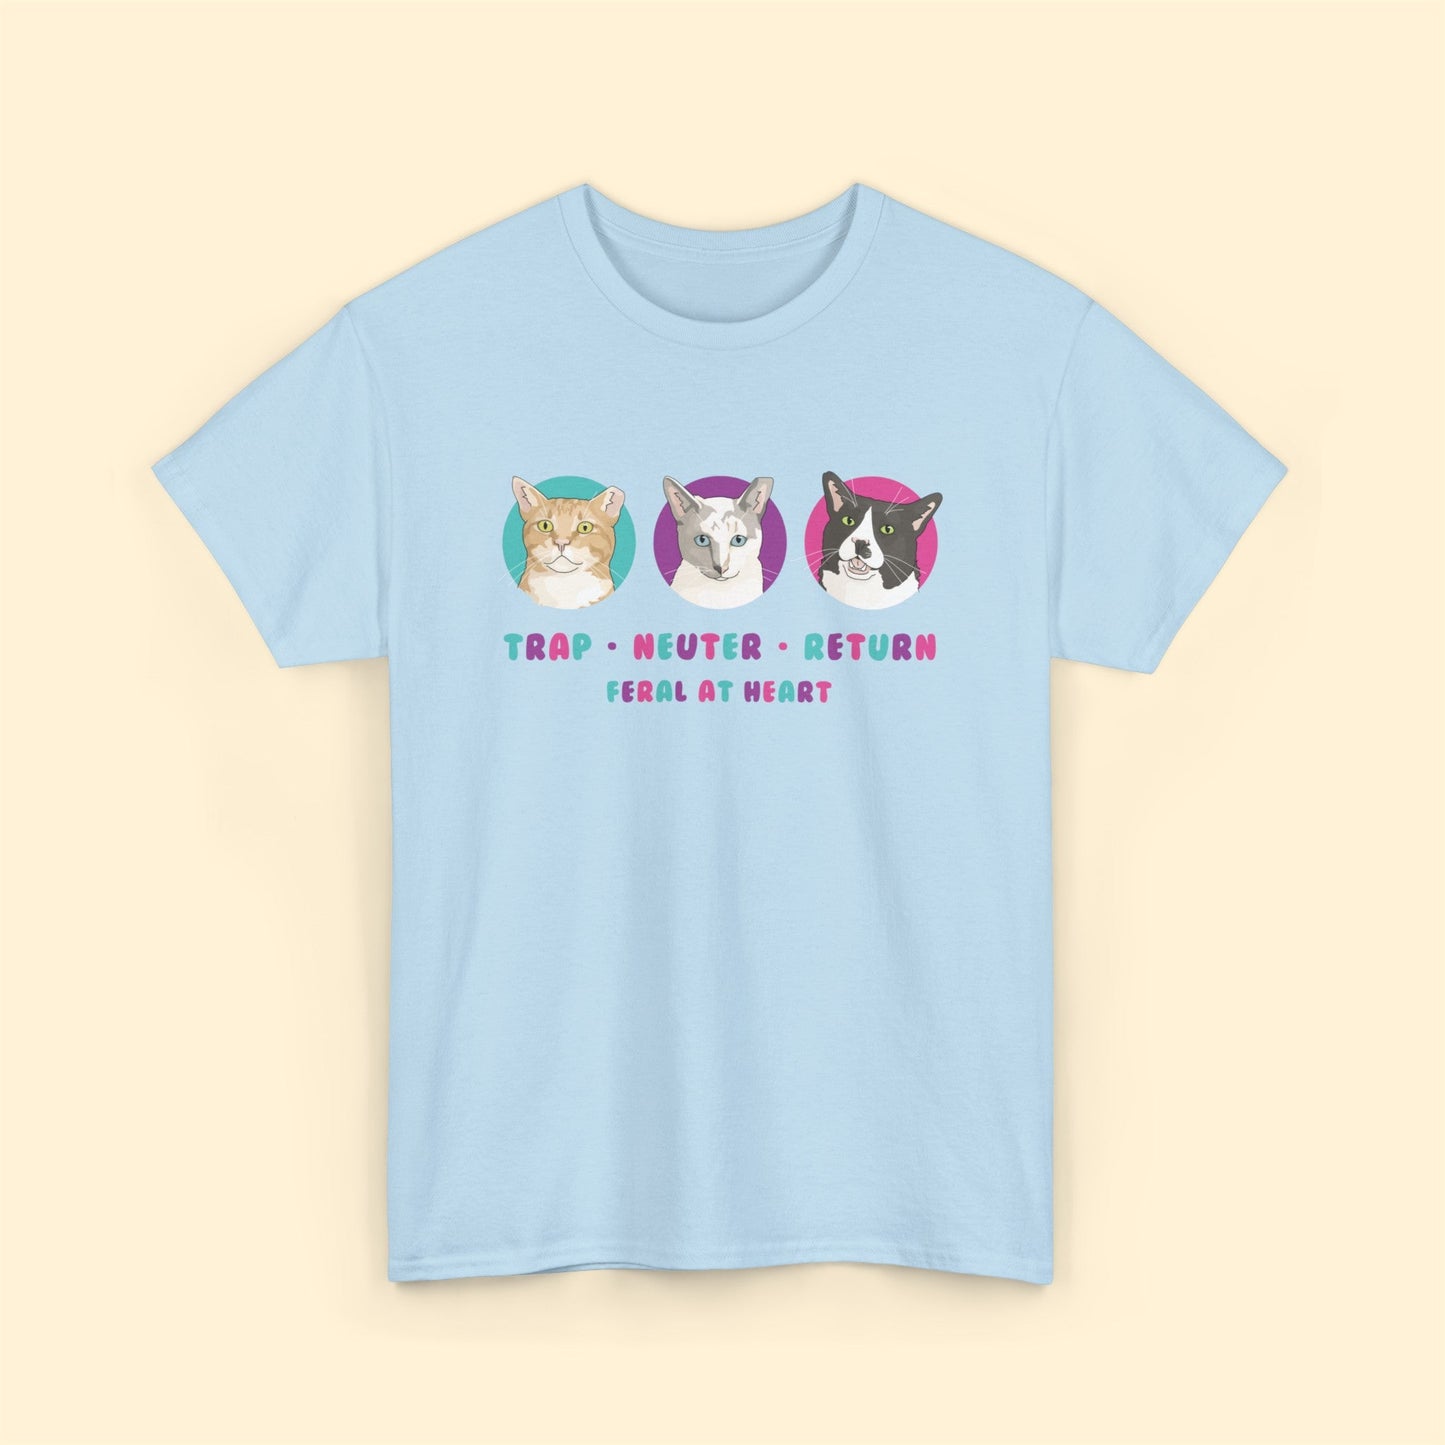 Colorful Kitties | FUNDRAISER for Feral At Heart | T-shirt - Detezi Designs-31438223434789860048